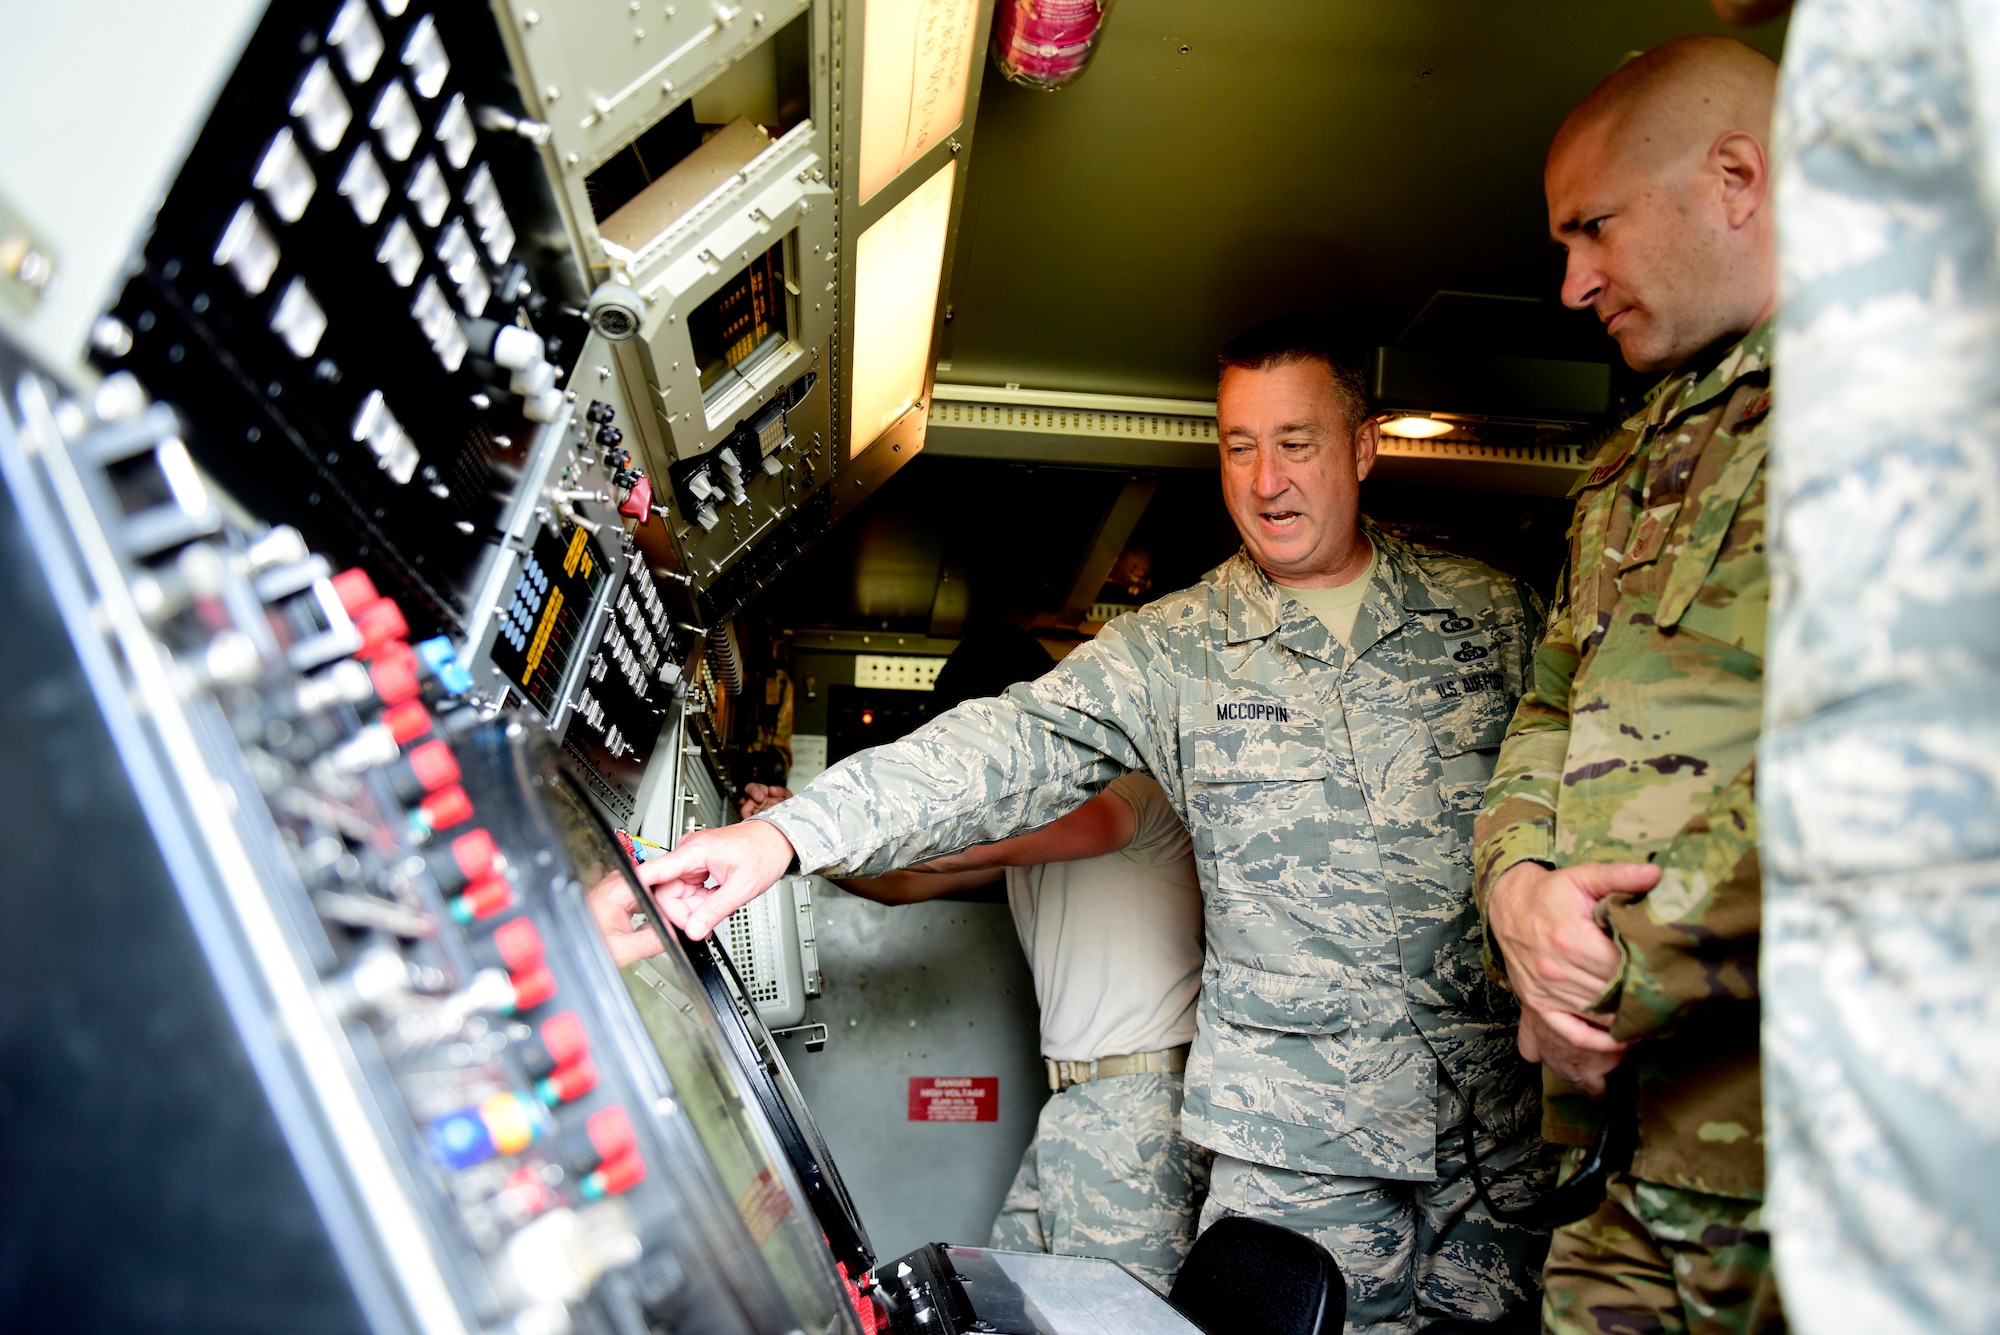 U.S. Air Force Master Sgt. Heath McCoppin, 123rd Air Control Squadron Electronic Protection Technician, explains TPS-75 radar operations to Chief Master Sgt. Toby Roach, 31st Operations Group Superintendent at Pula Airport, Croatia, May 28, 2019. Members of the 123rd Air Control Squadron, an Ohio Air National Guard unit, is augmenting the 606th Air Control Squadron during exercise Astral Knight 2019. (U.S. Air Force photo by Staff Sgt. Tory Cusimano)